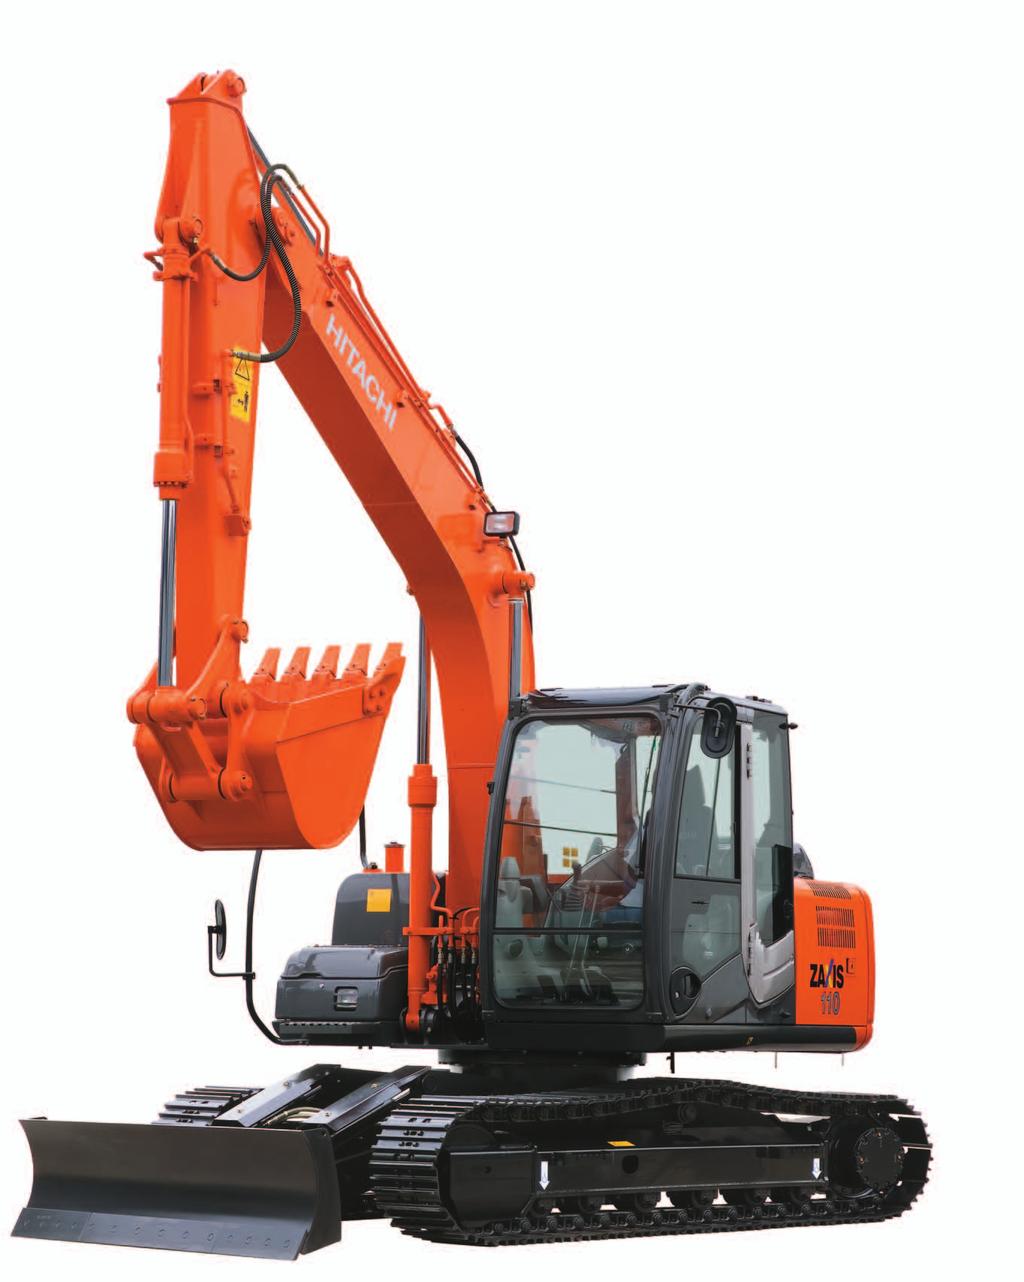 ZAXIS-3 series HYDRAULIC EXCAVATOR Model Code : ZX110-3 / ZX110M-3 Engine Rated Power : 69 kw (93 HP) Operating Weight :